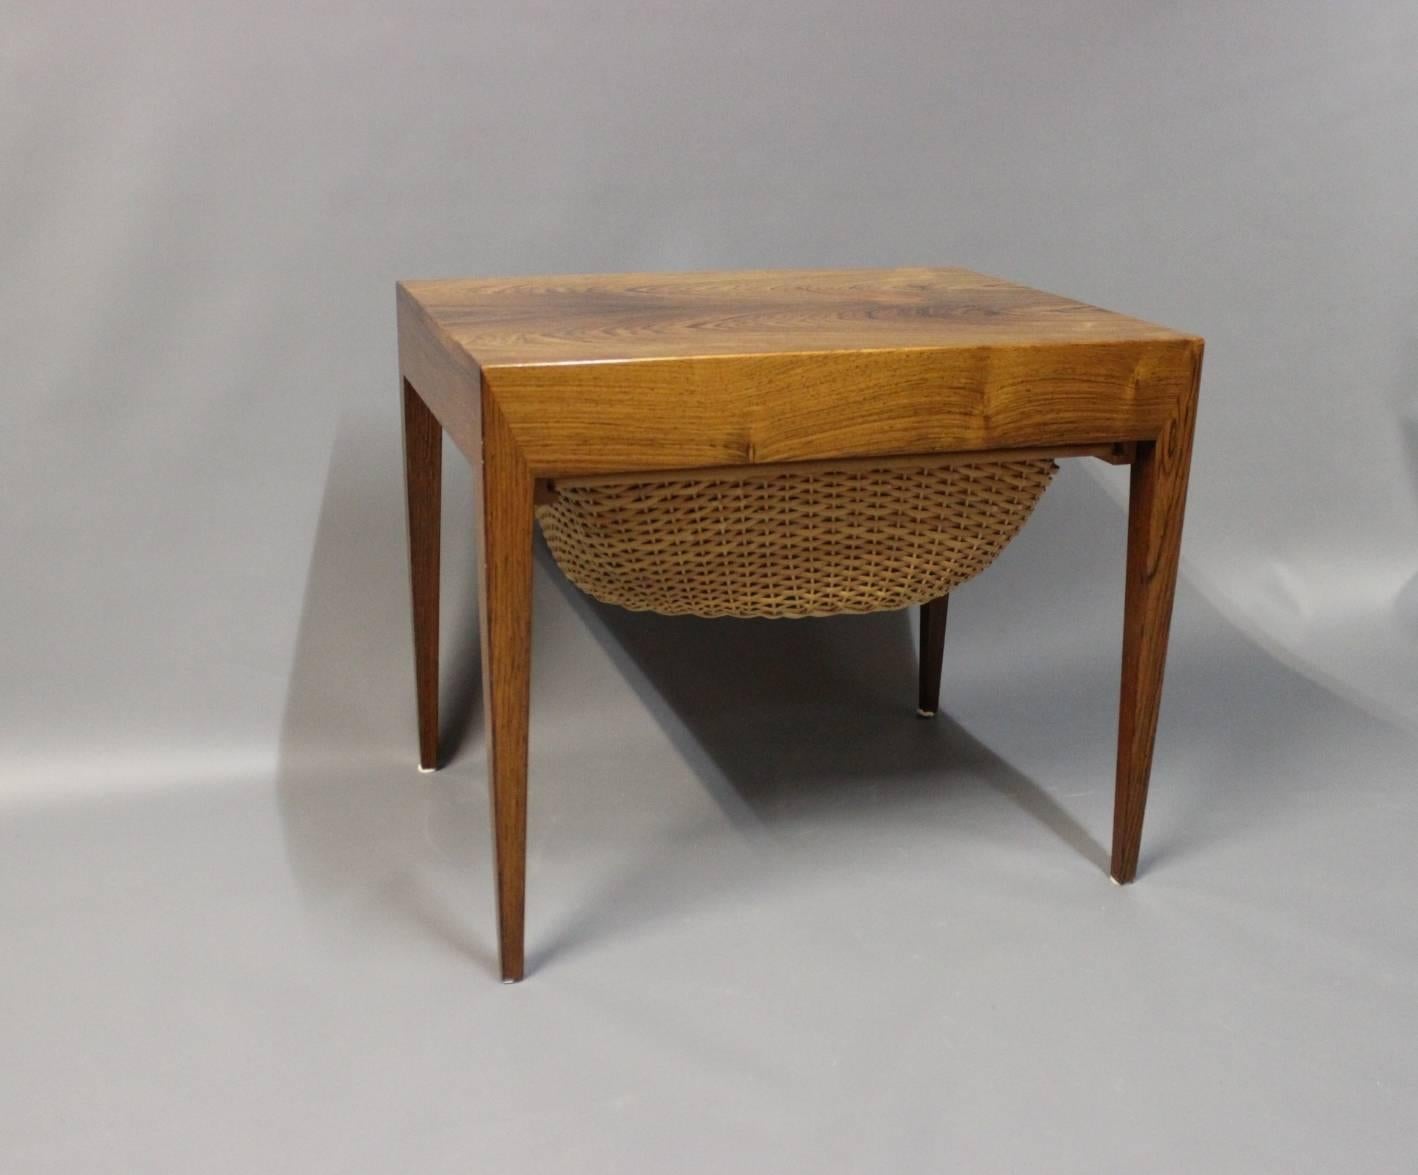 Small sewing table in rosewood and from the 1960s. The table was designed by Severing Hansen and manufactured by Haslev furniture factory. 